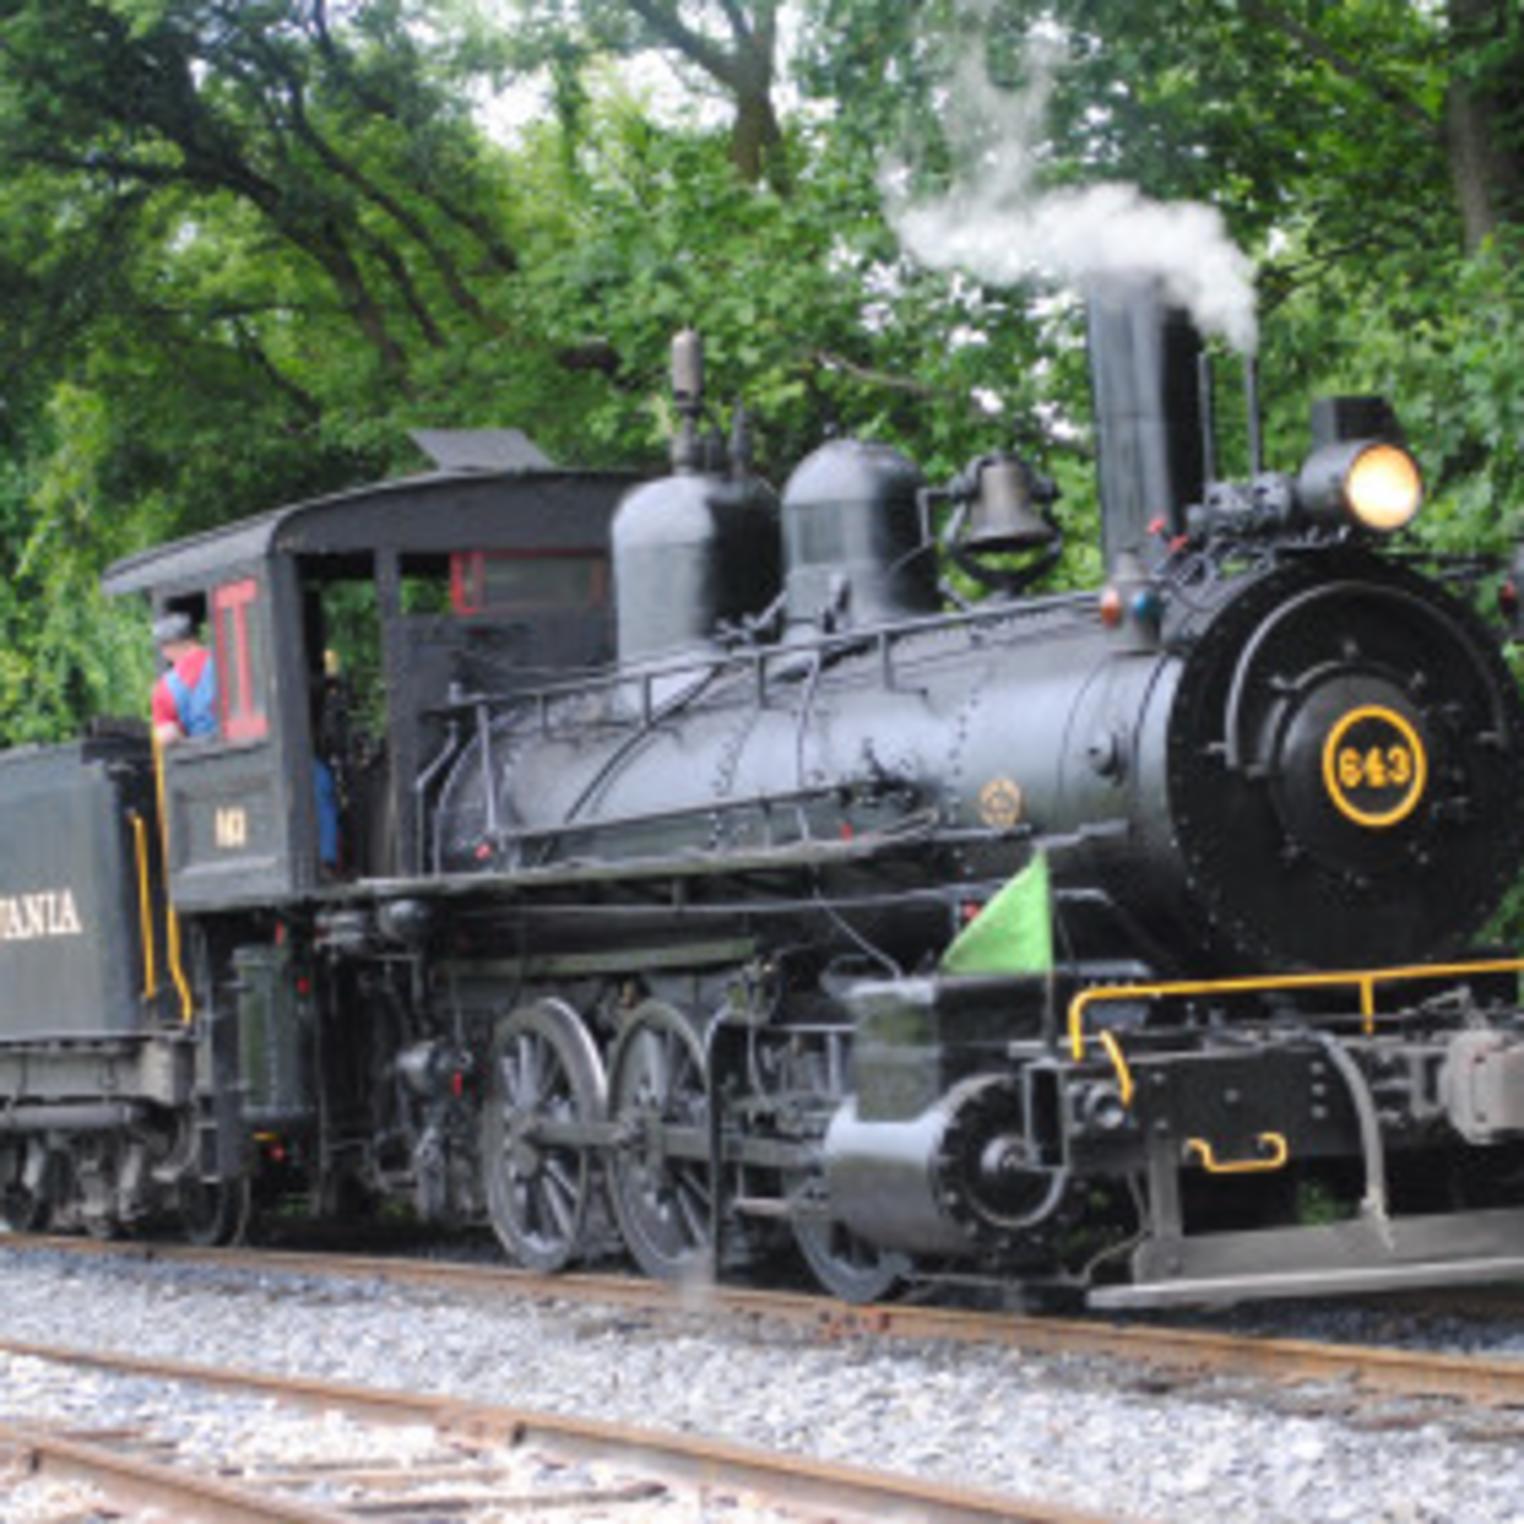 UP: From Steam to Green: The History and Evolution of Locomotives